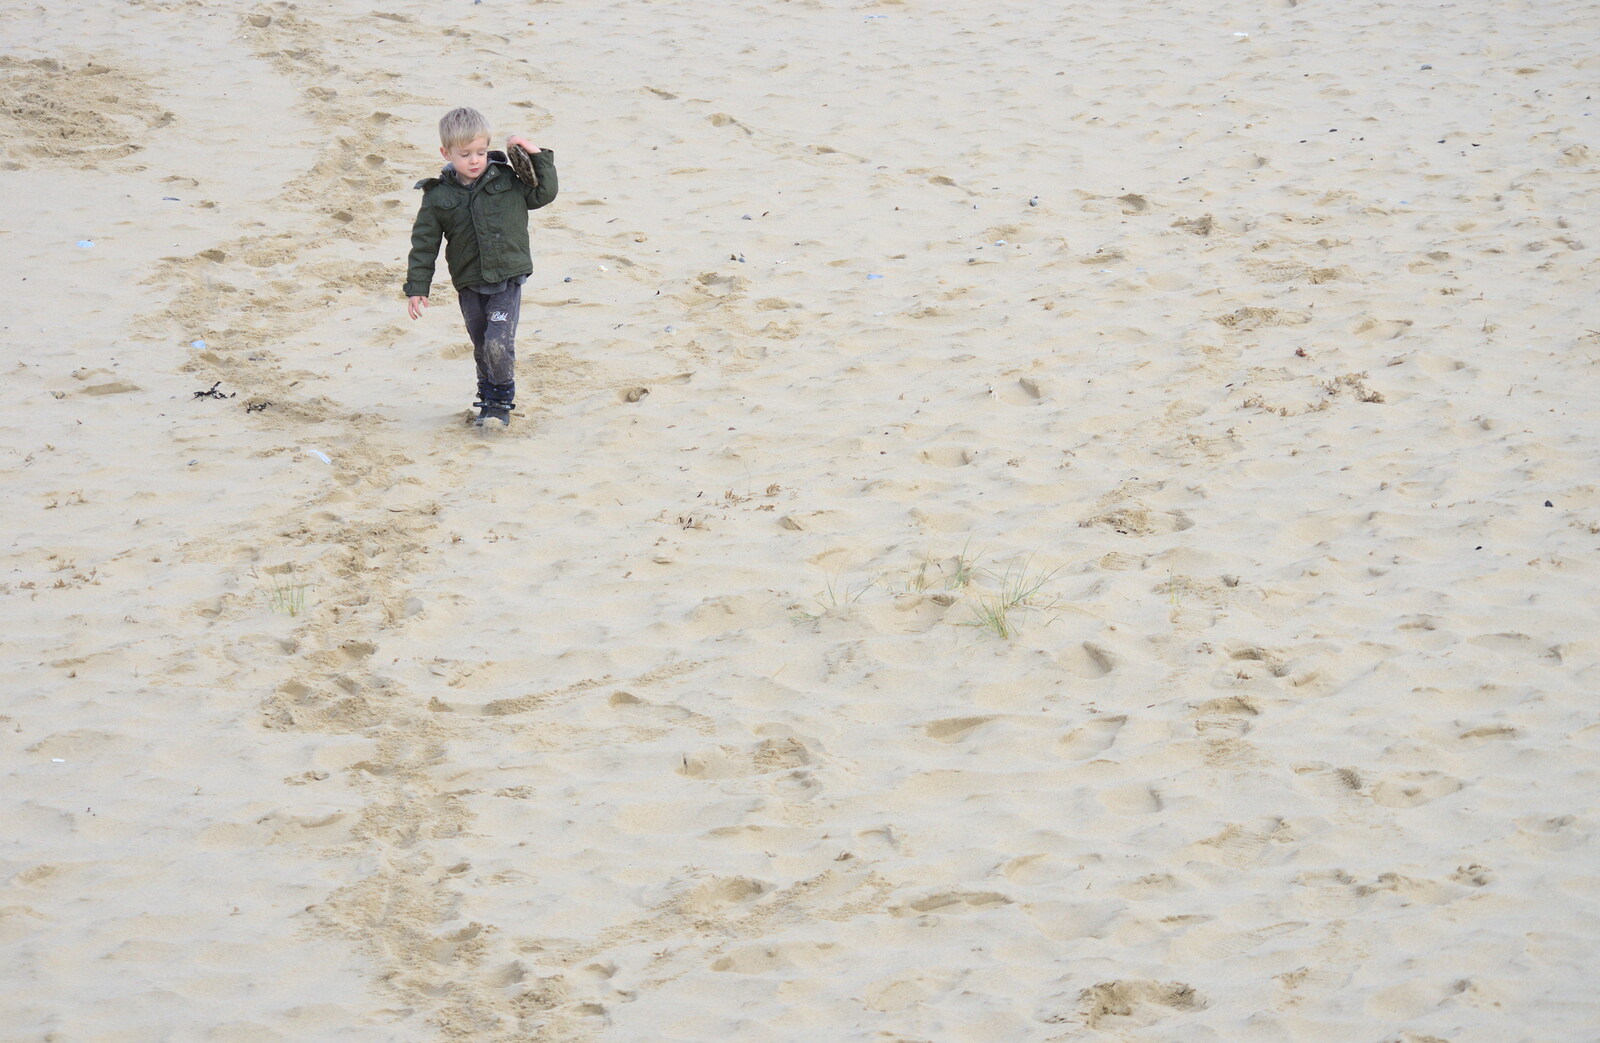 Harry, on the beach from The Seals of Horsey Gap, Norfolk - 21st February 2016